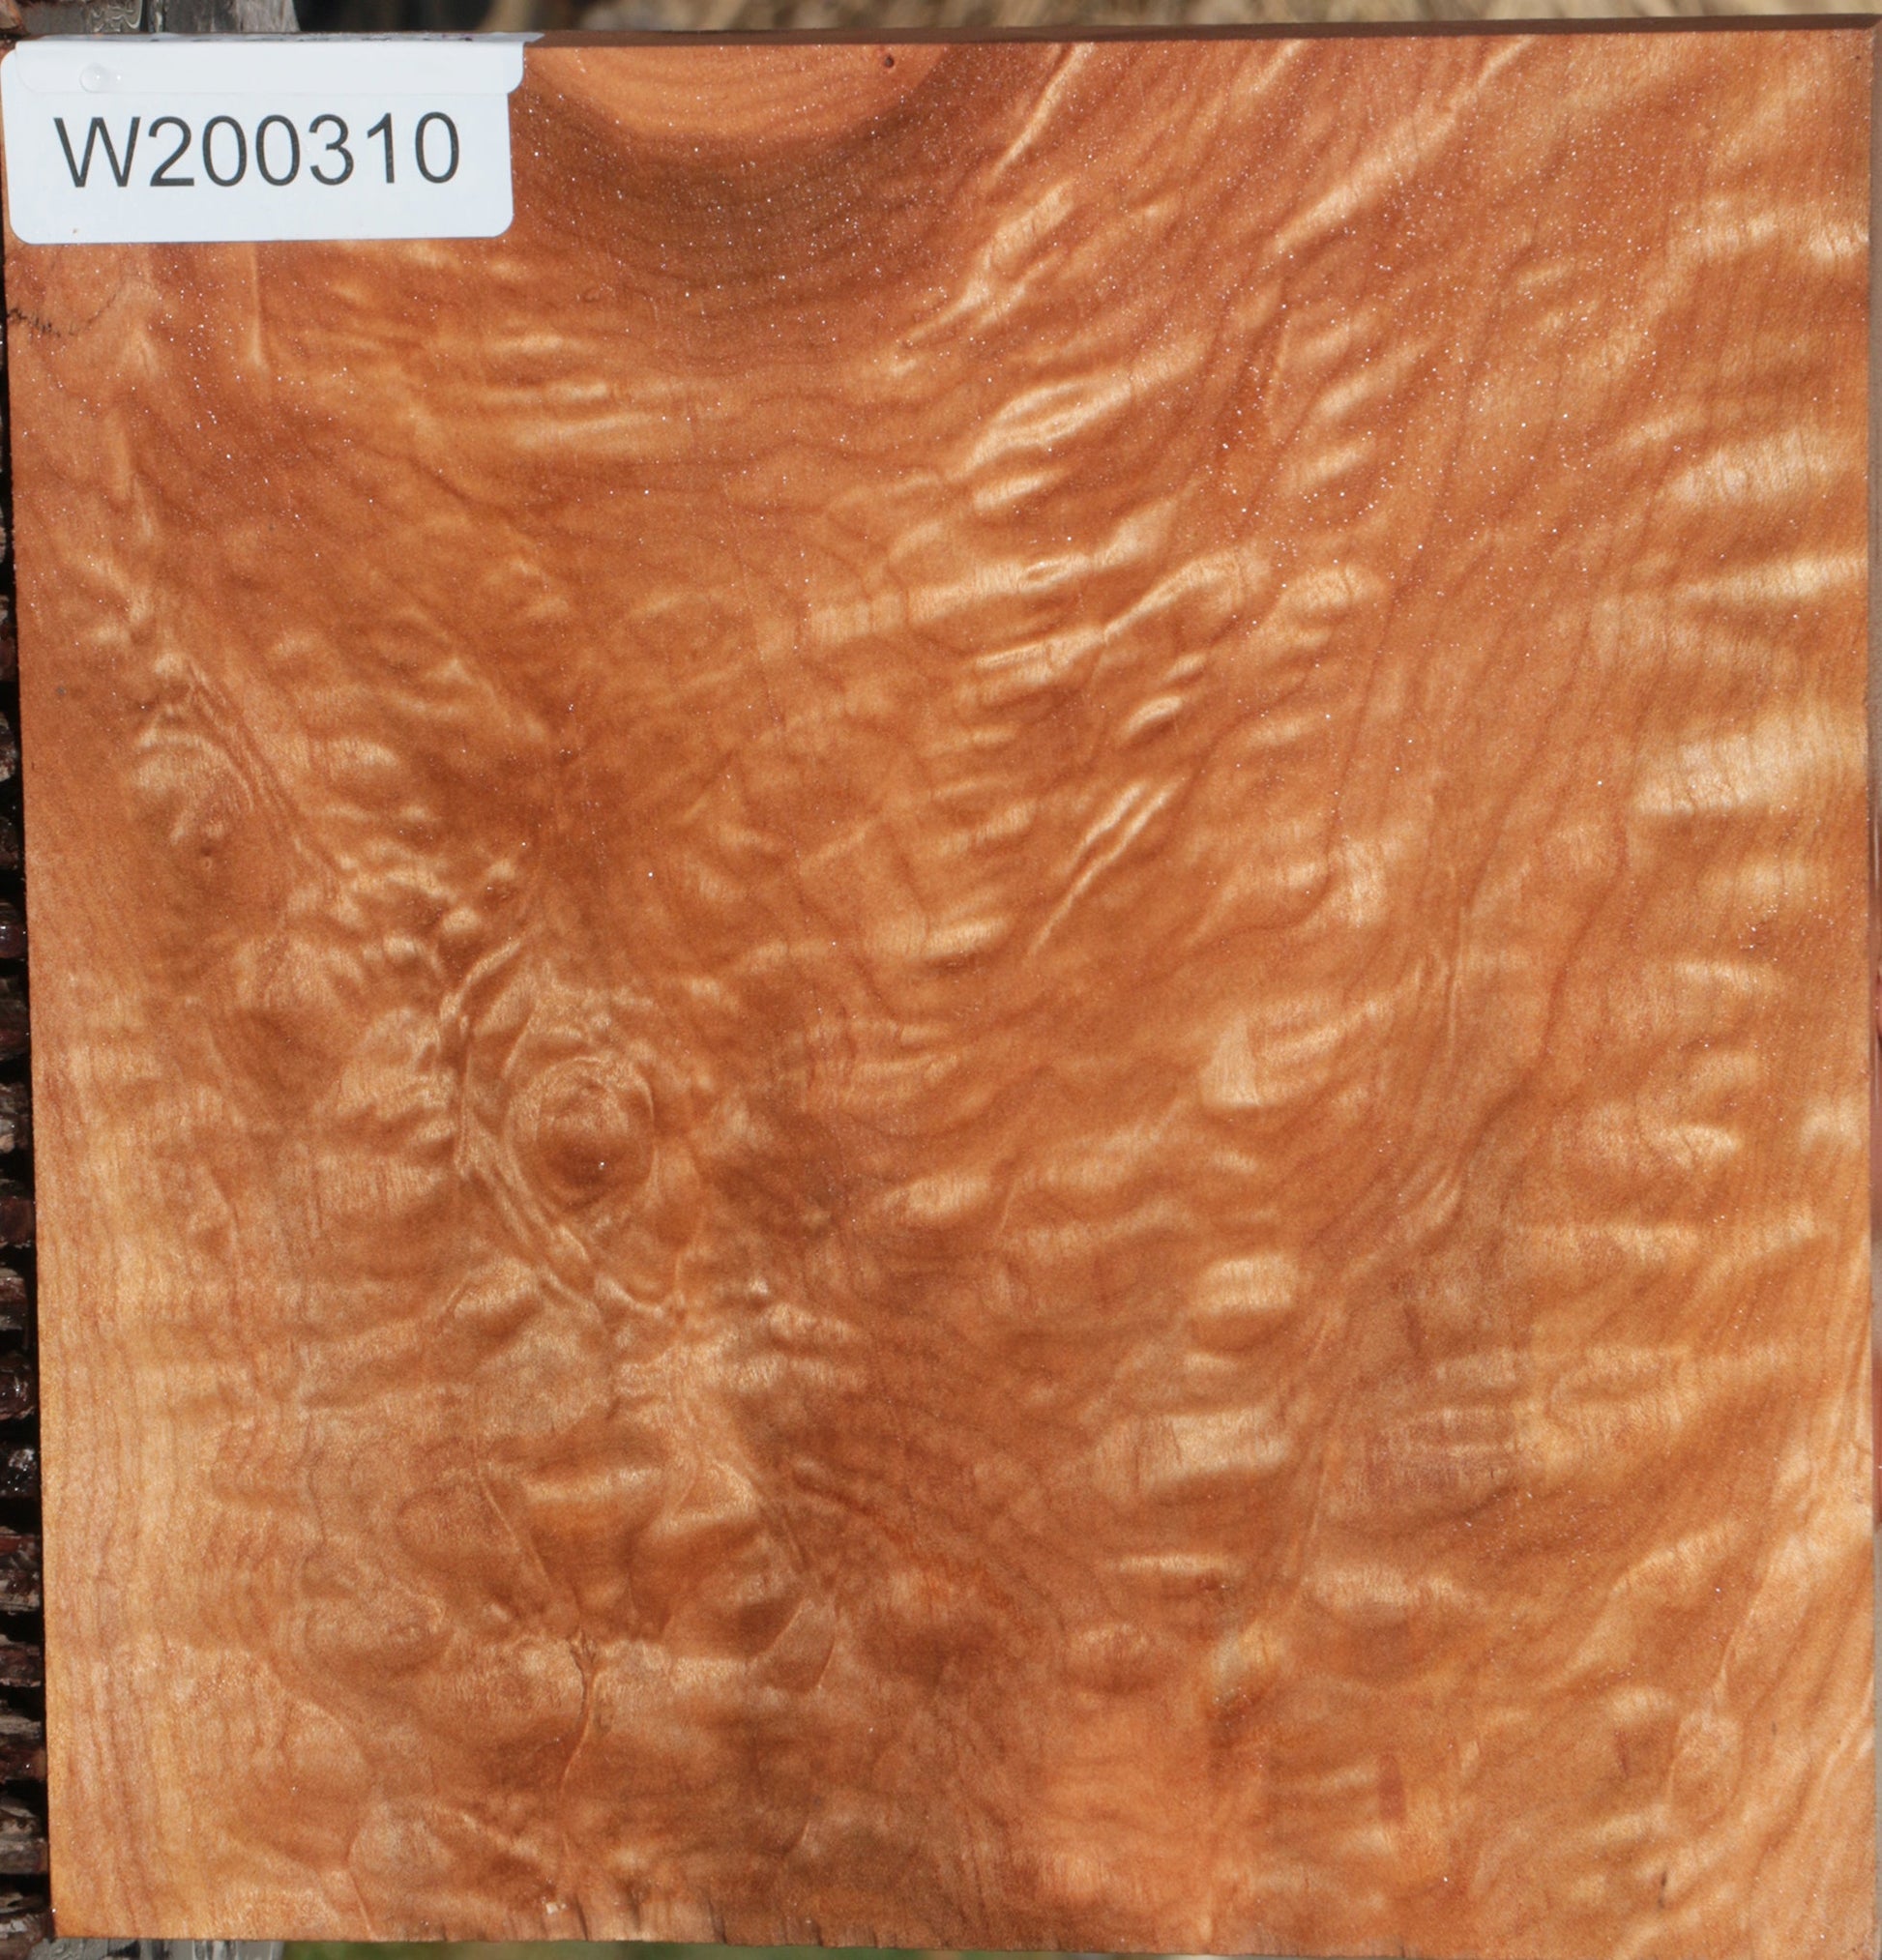 Quilted Maple – Cook Woods